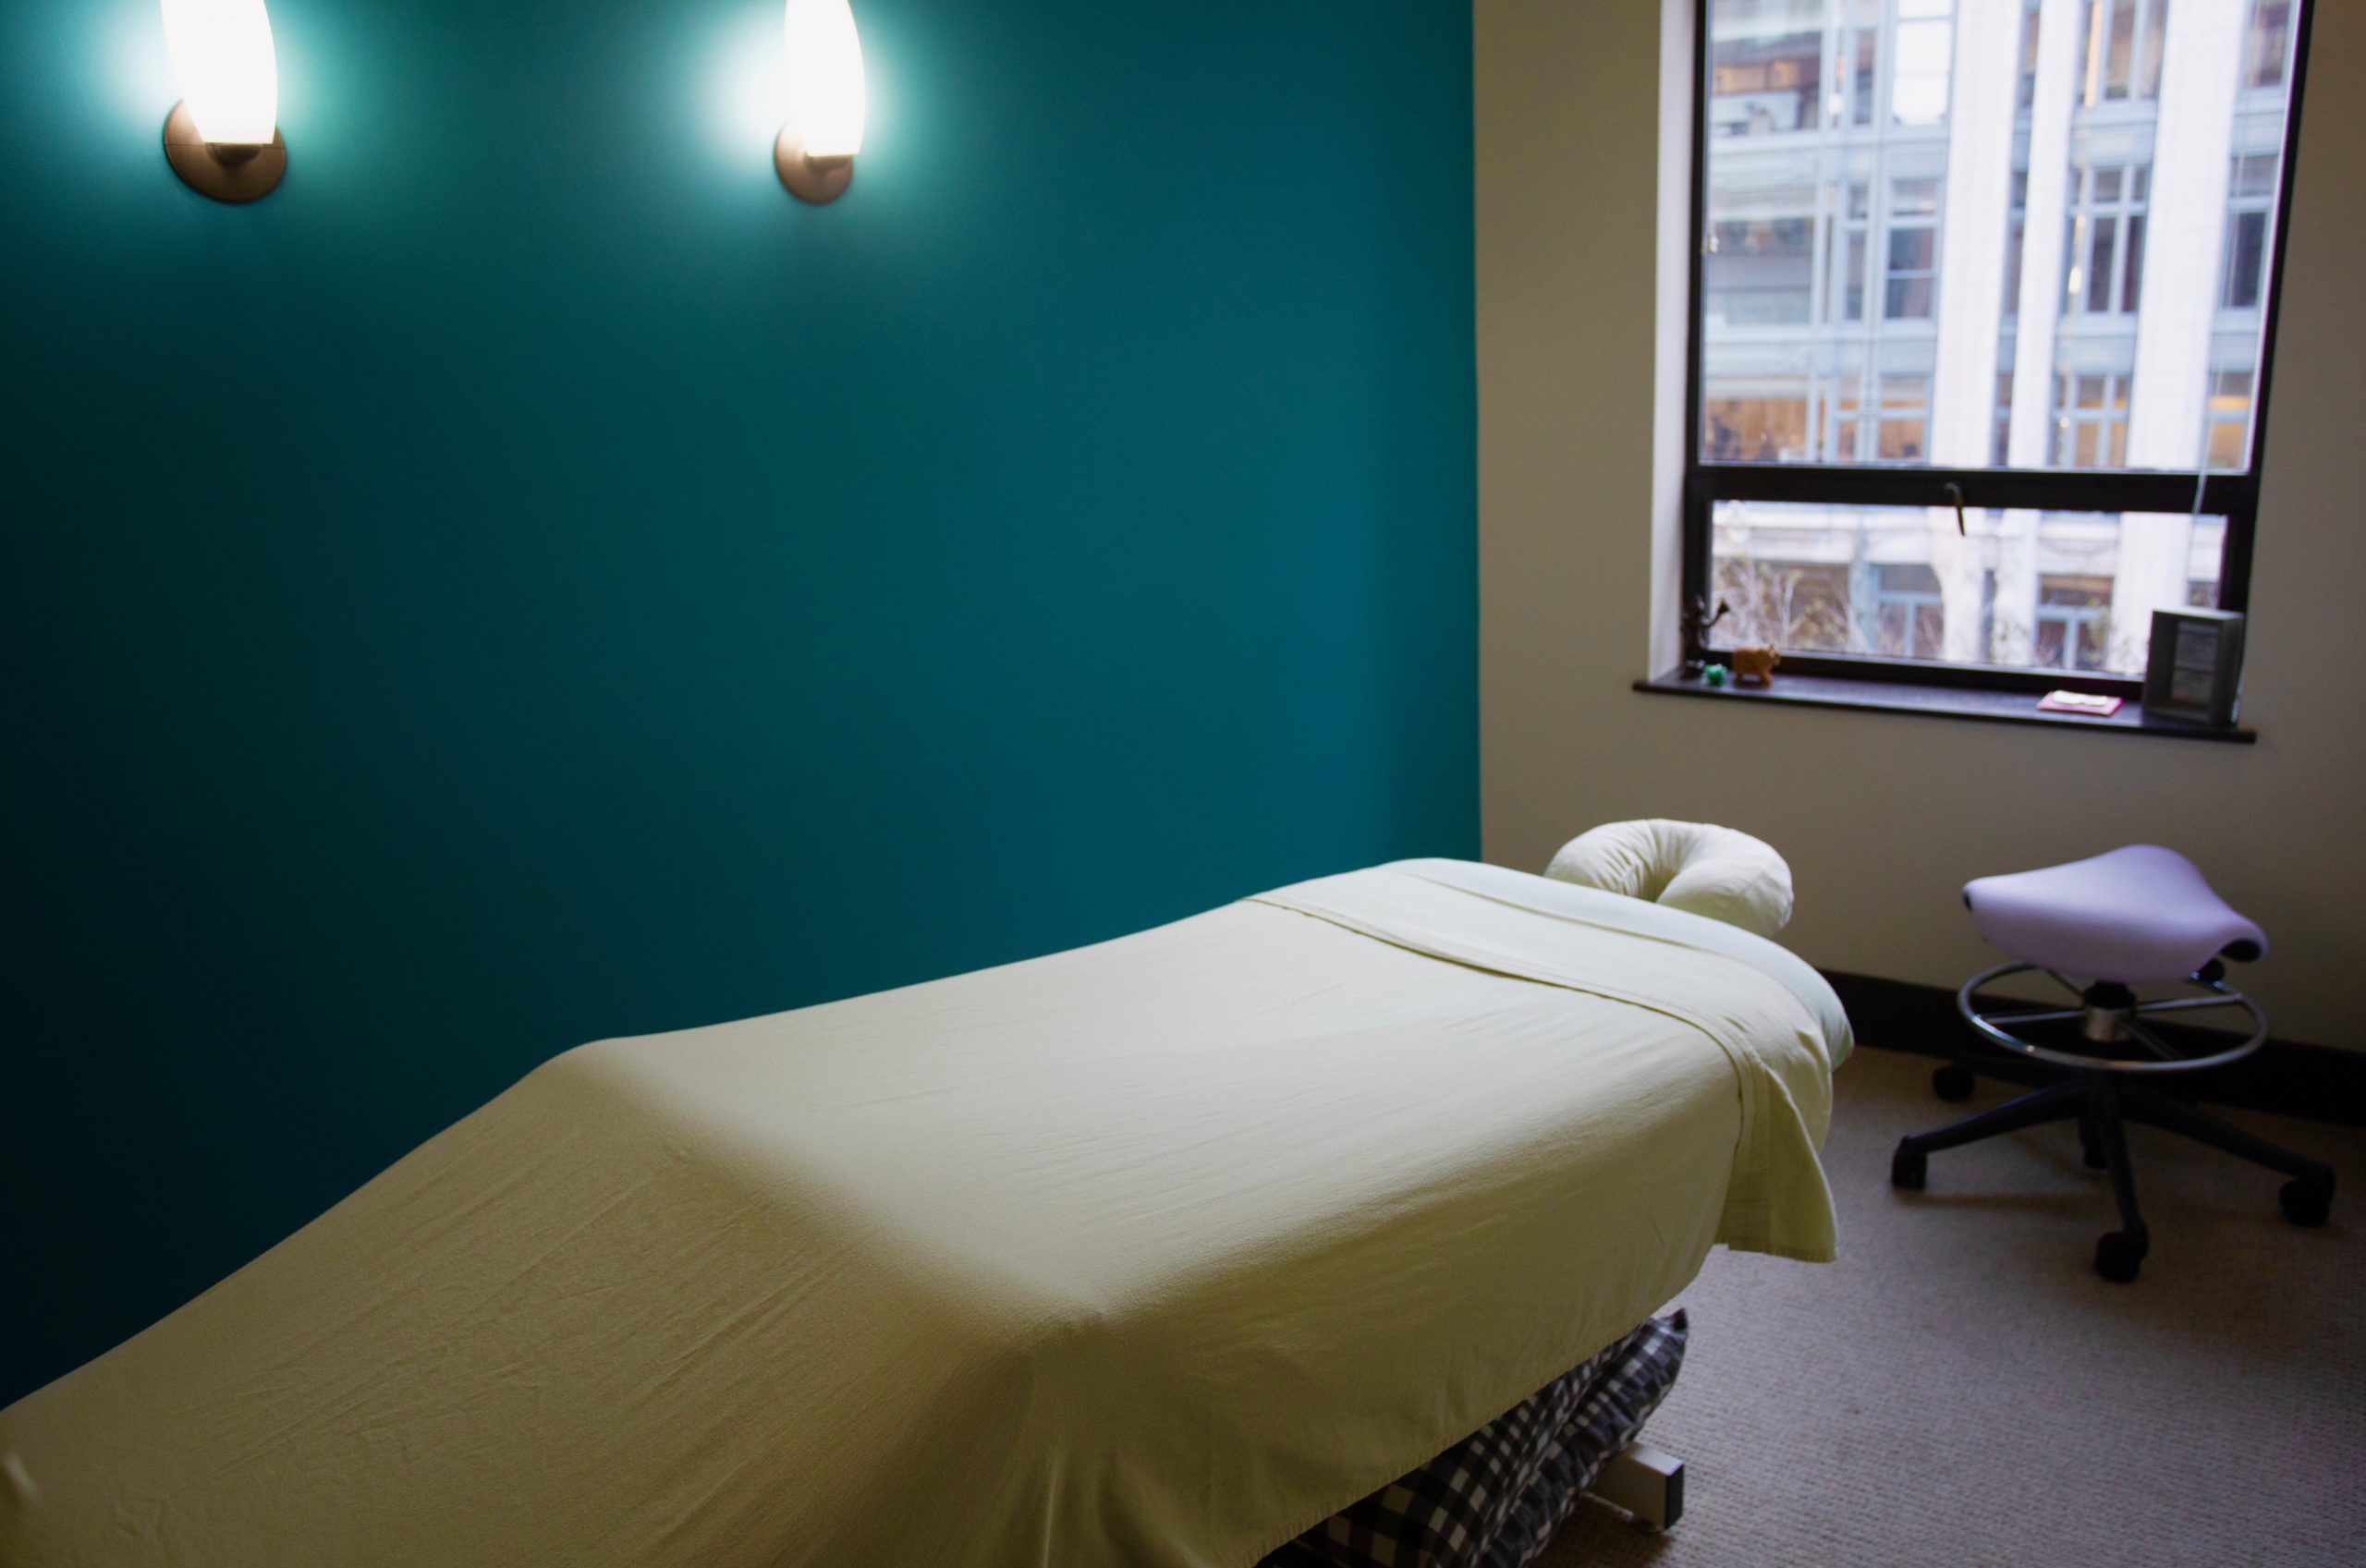 Massage table and treatment room